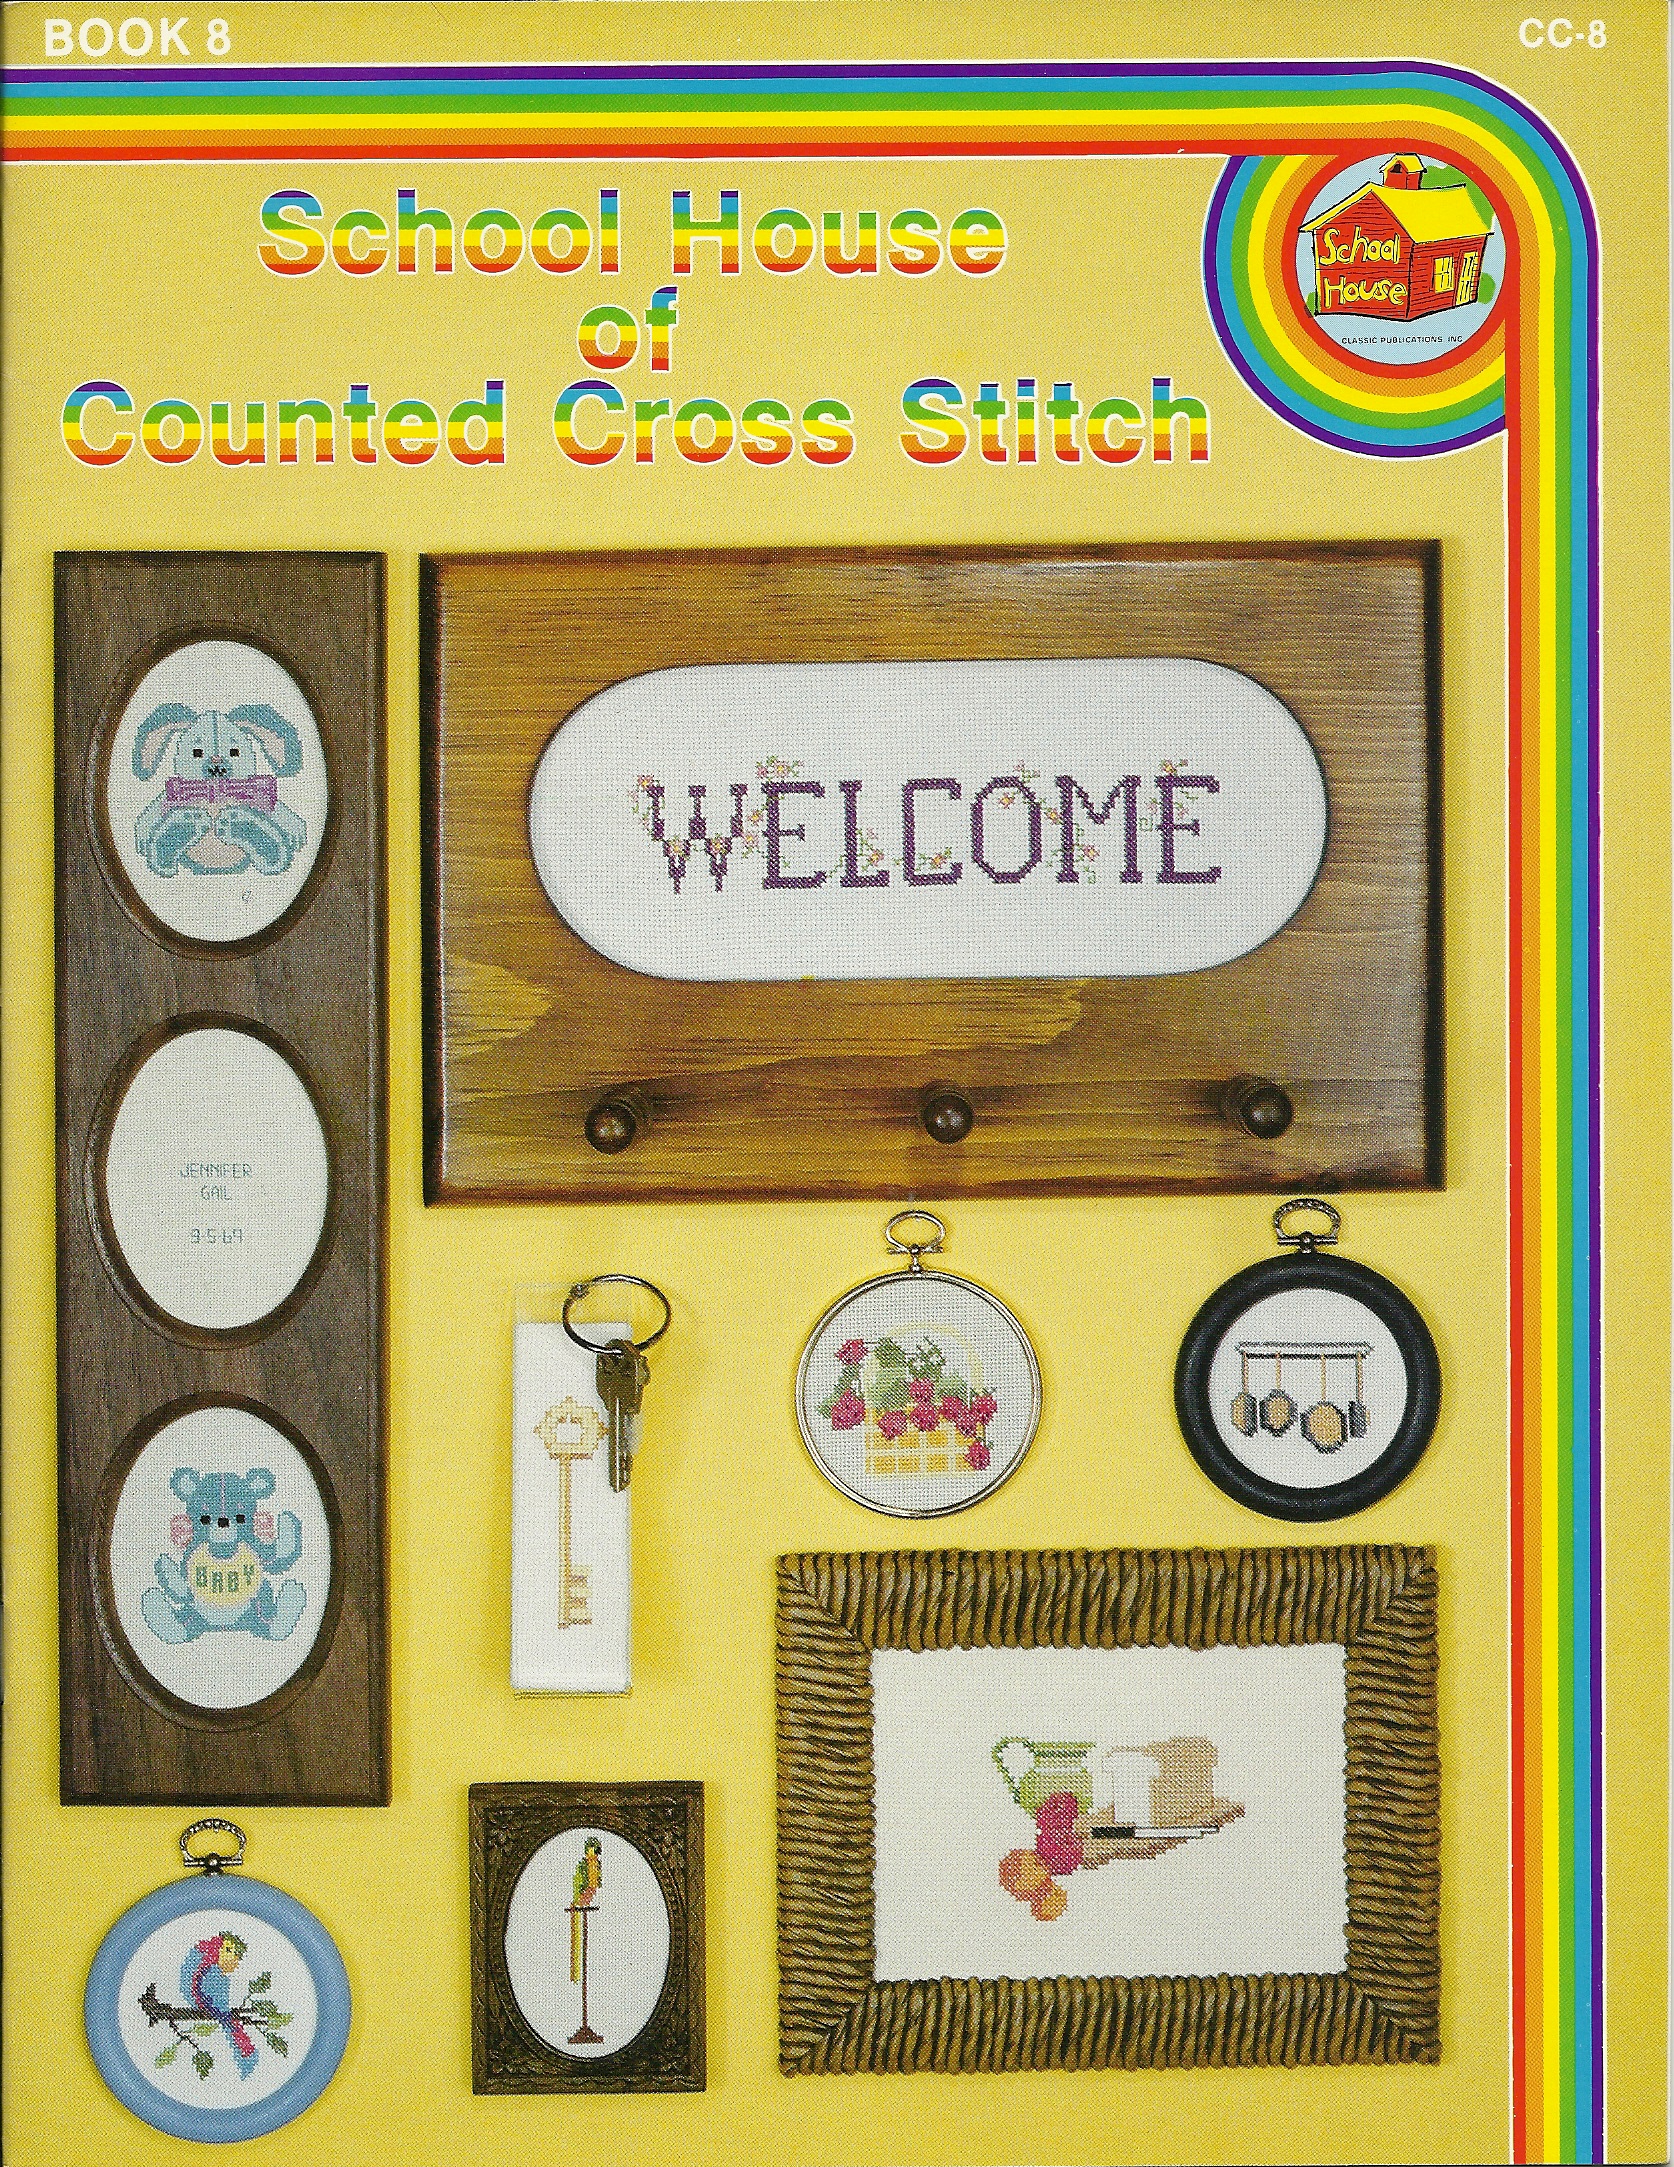 School House of Counted Cross Stitch  Book 8